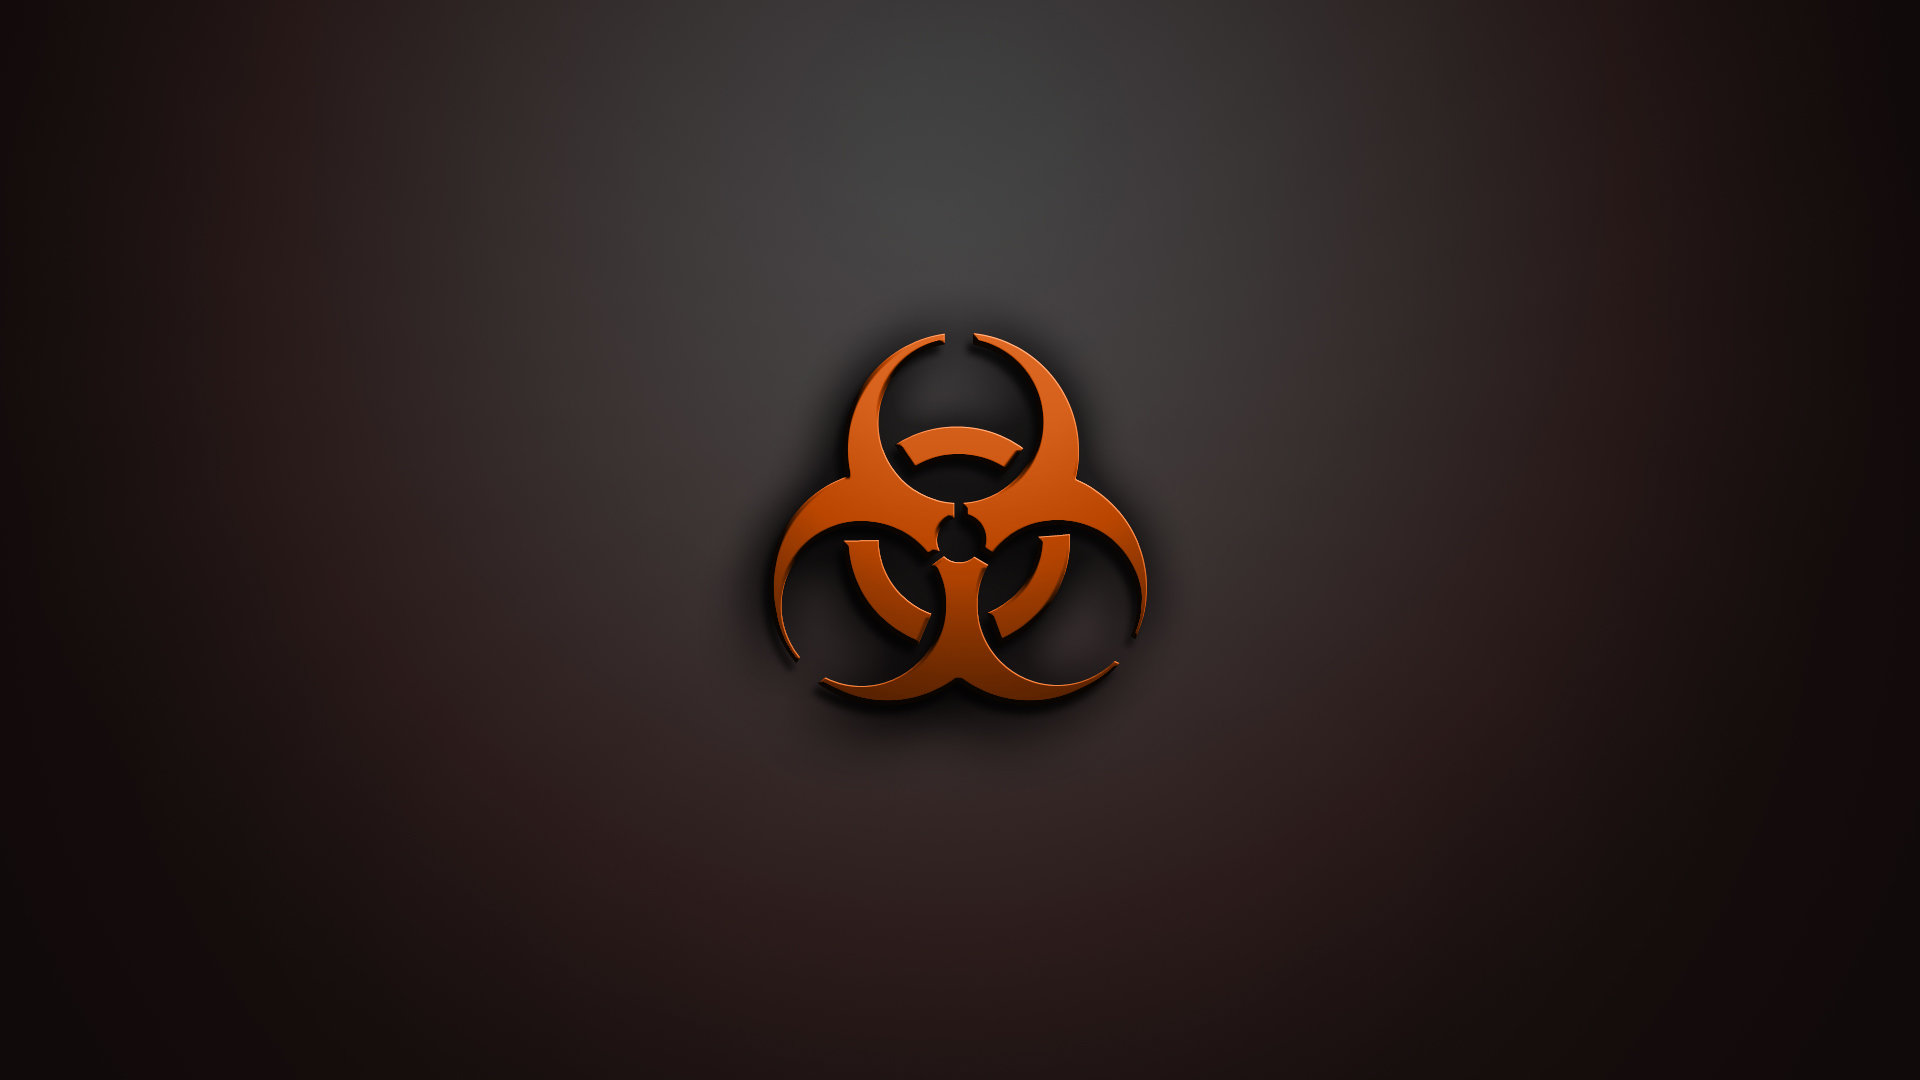 Download full hd 1080p Biohazard PC background ID:86517 for free